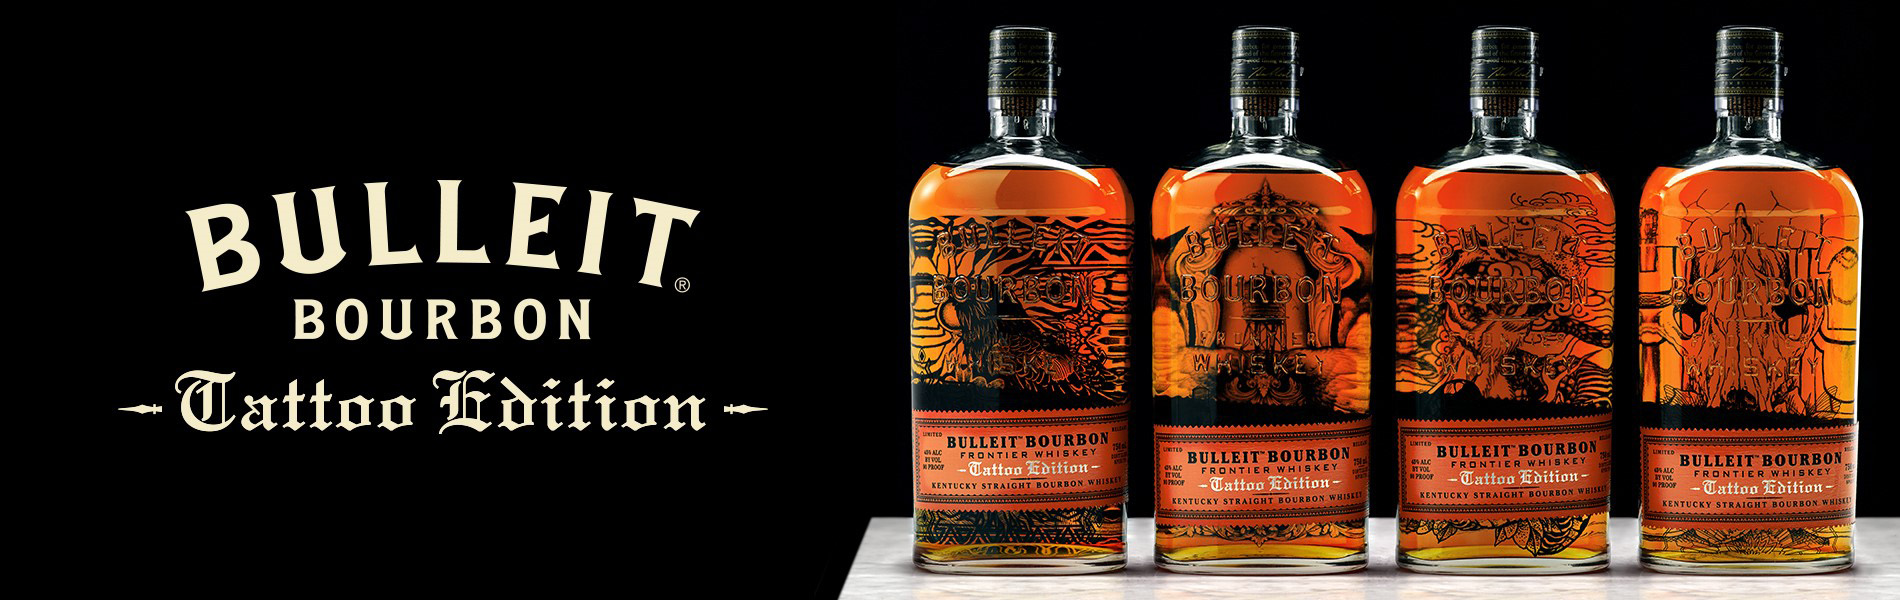 Bulleit Bourbon Gets Inked By Limited For Artists Of Launch Top Tattoo Nation\'s